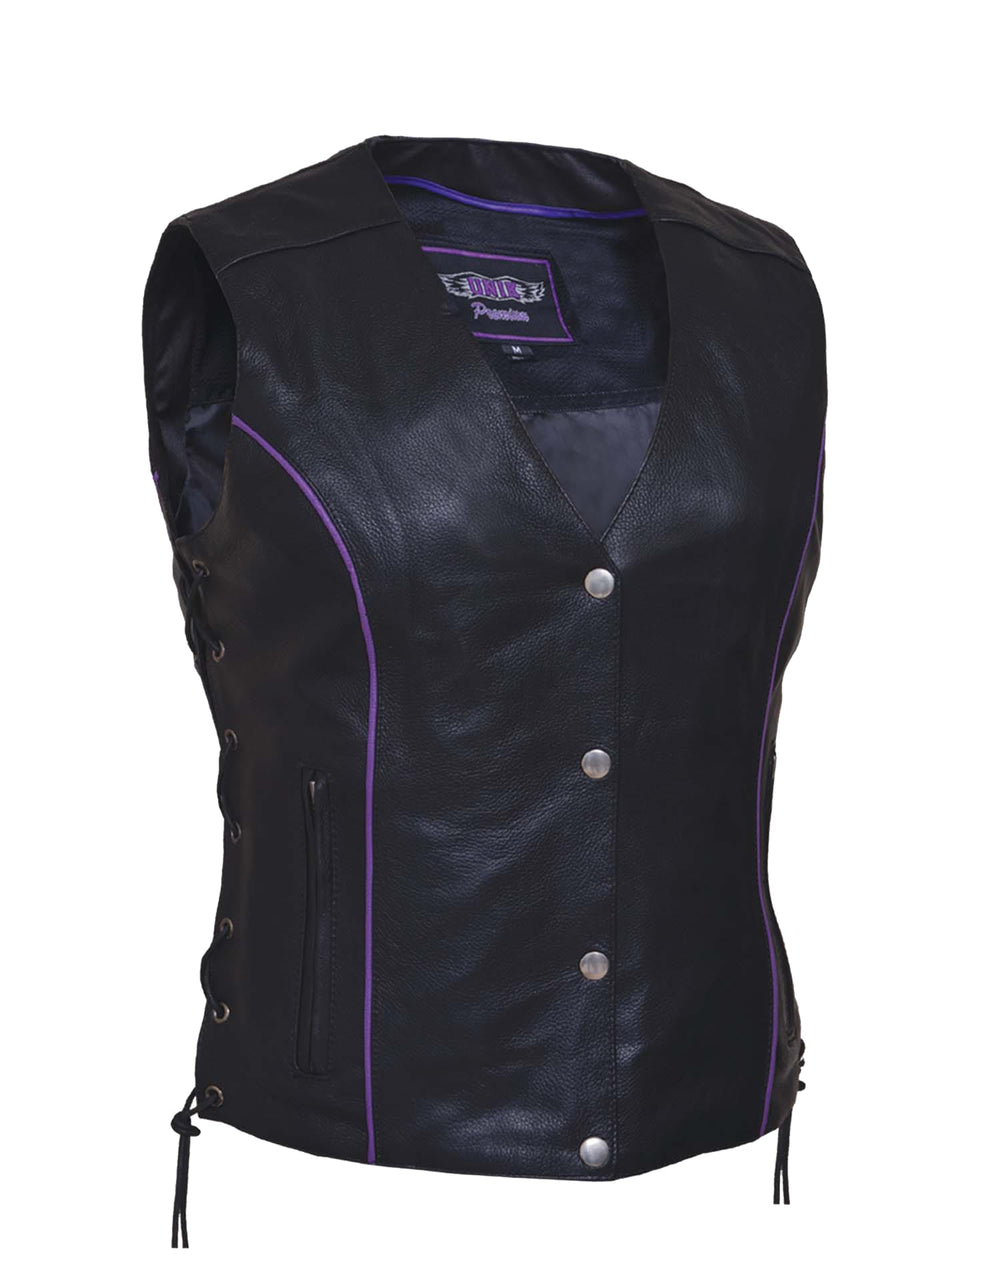 Ladies Premium Motorcycle Vest with Wing Embroidery on back